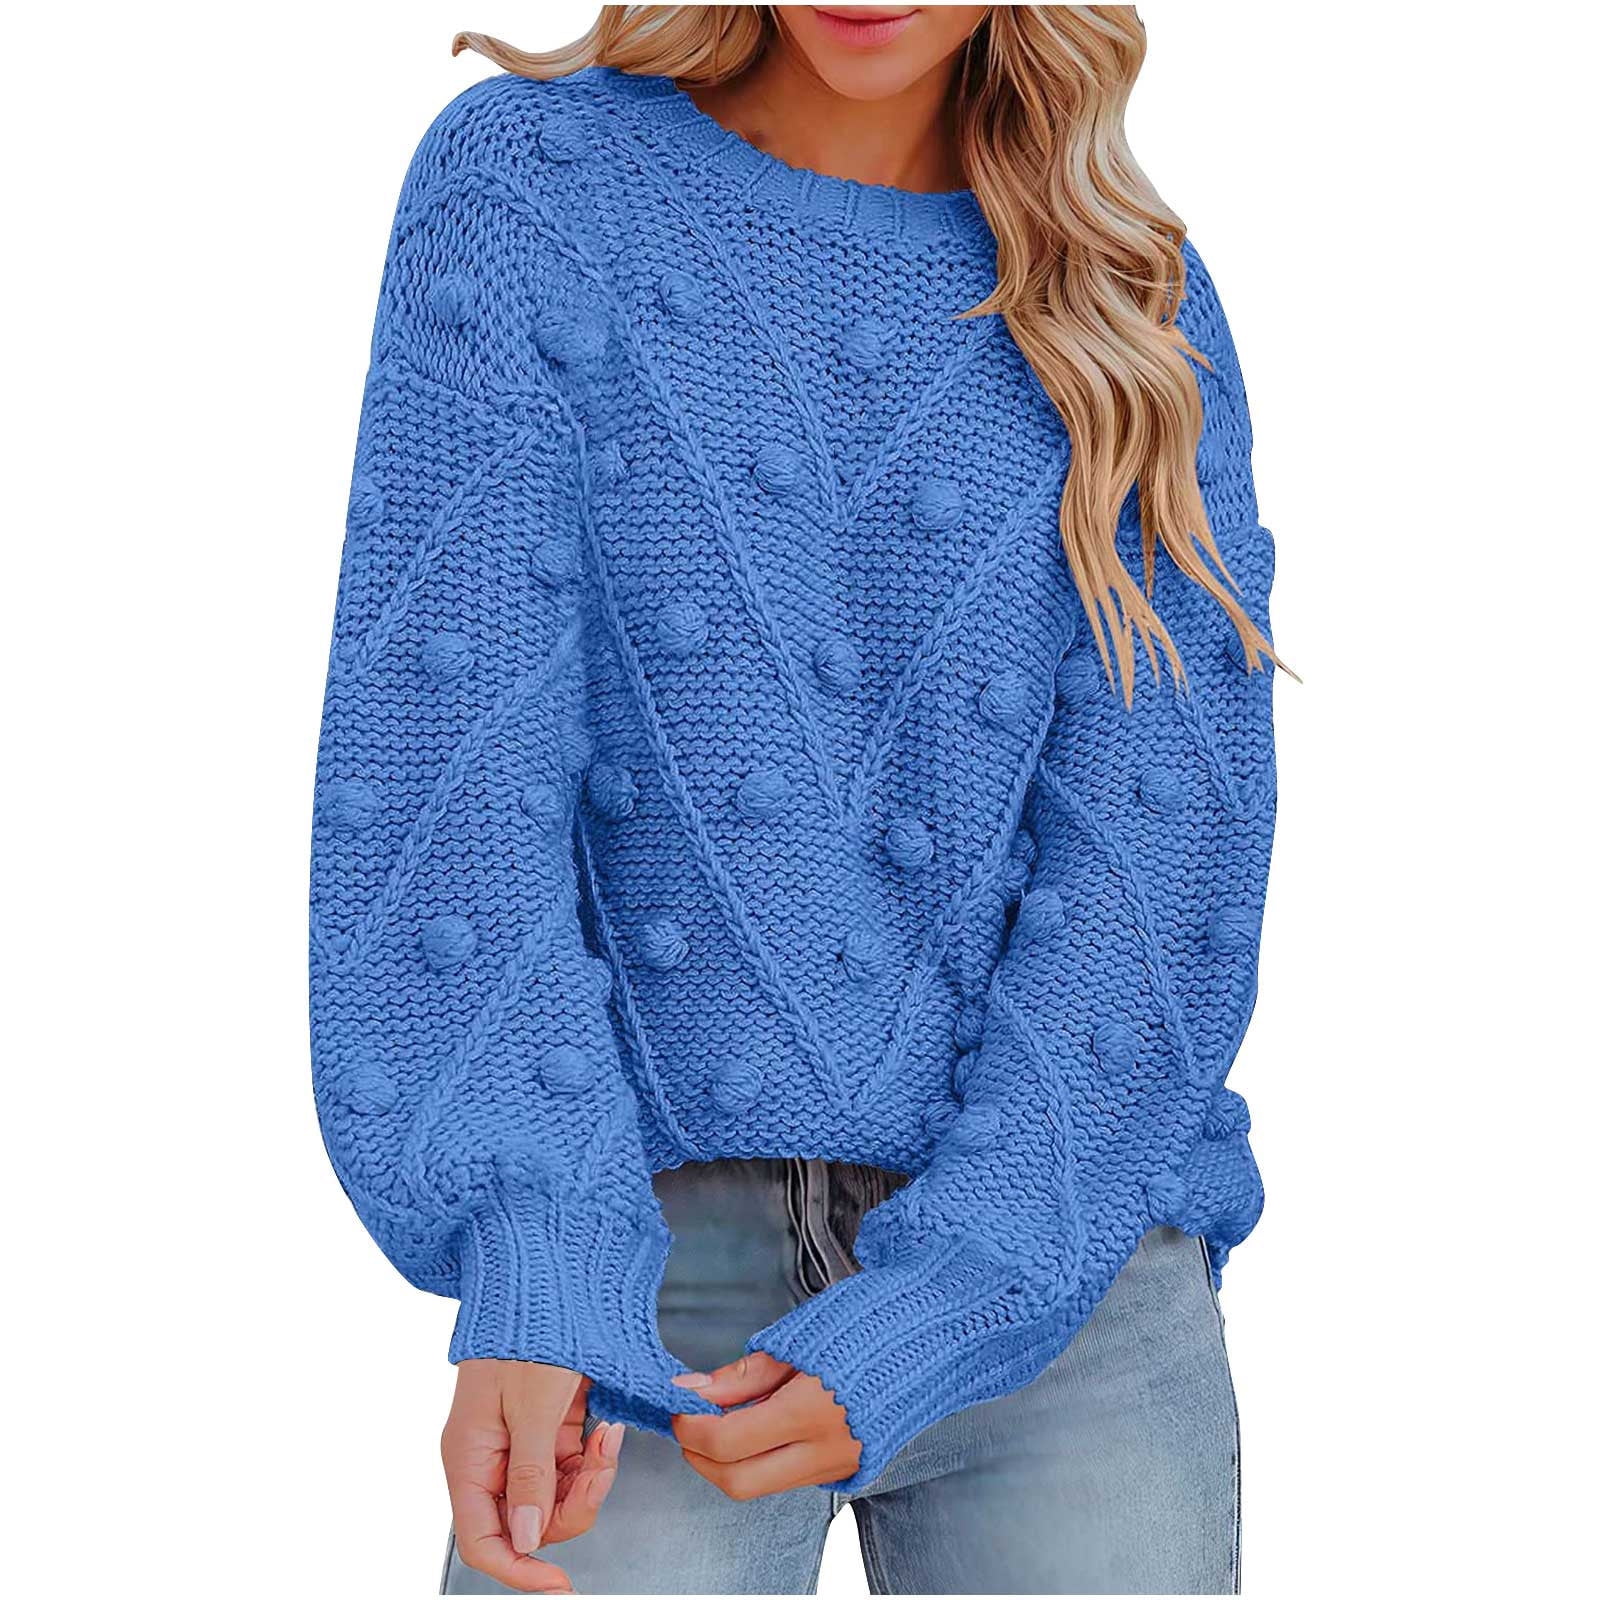 REORIAFEE Lightweight Sweaters for Women Long Sleeve Crewneck Solid ...